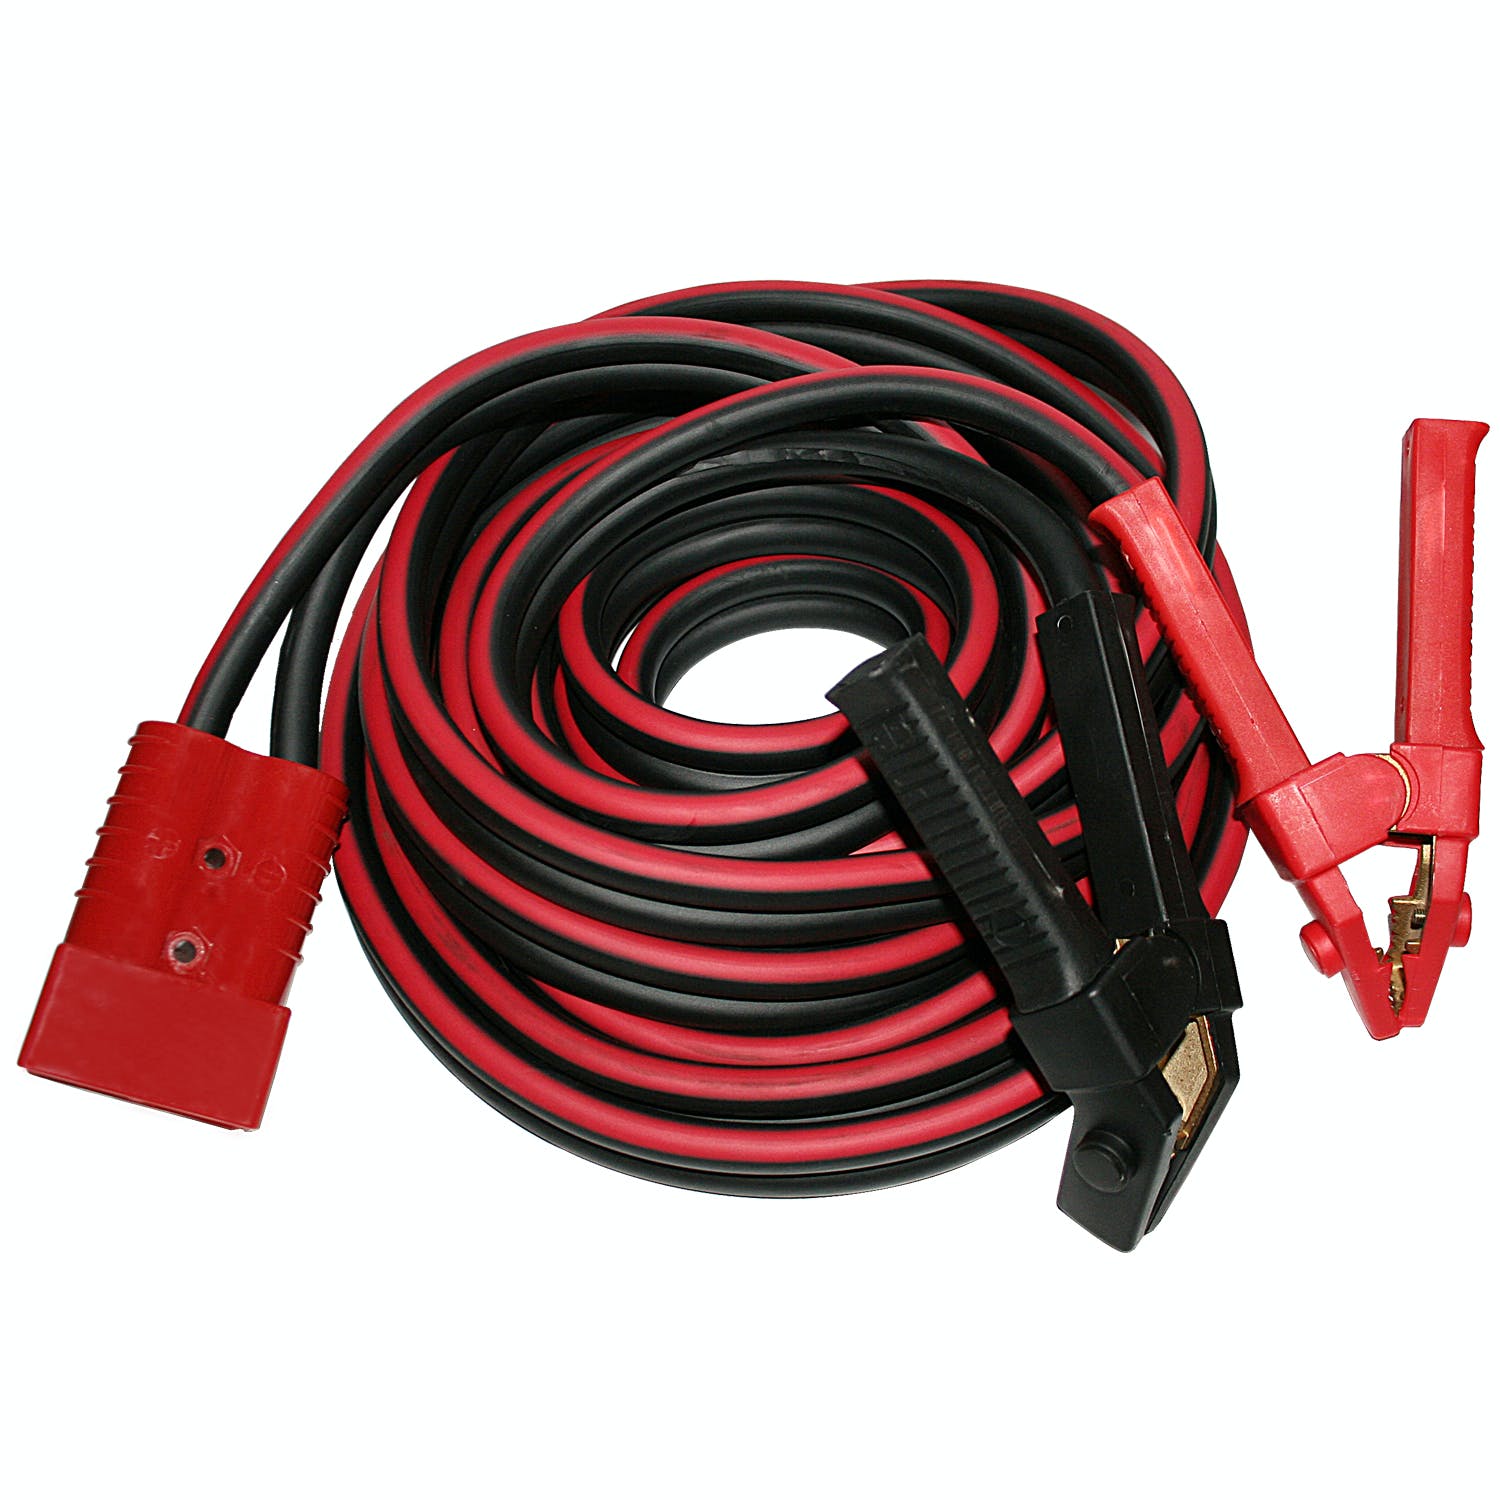 Bulldog Winch Co LLC 20335 Booster Cable Set, 25ft x 1/0ga with clamps and plug